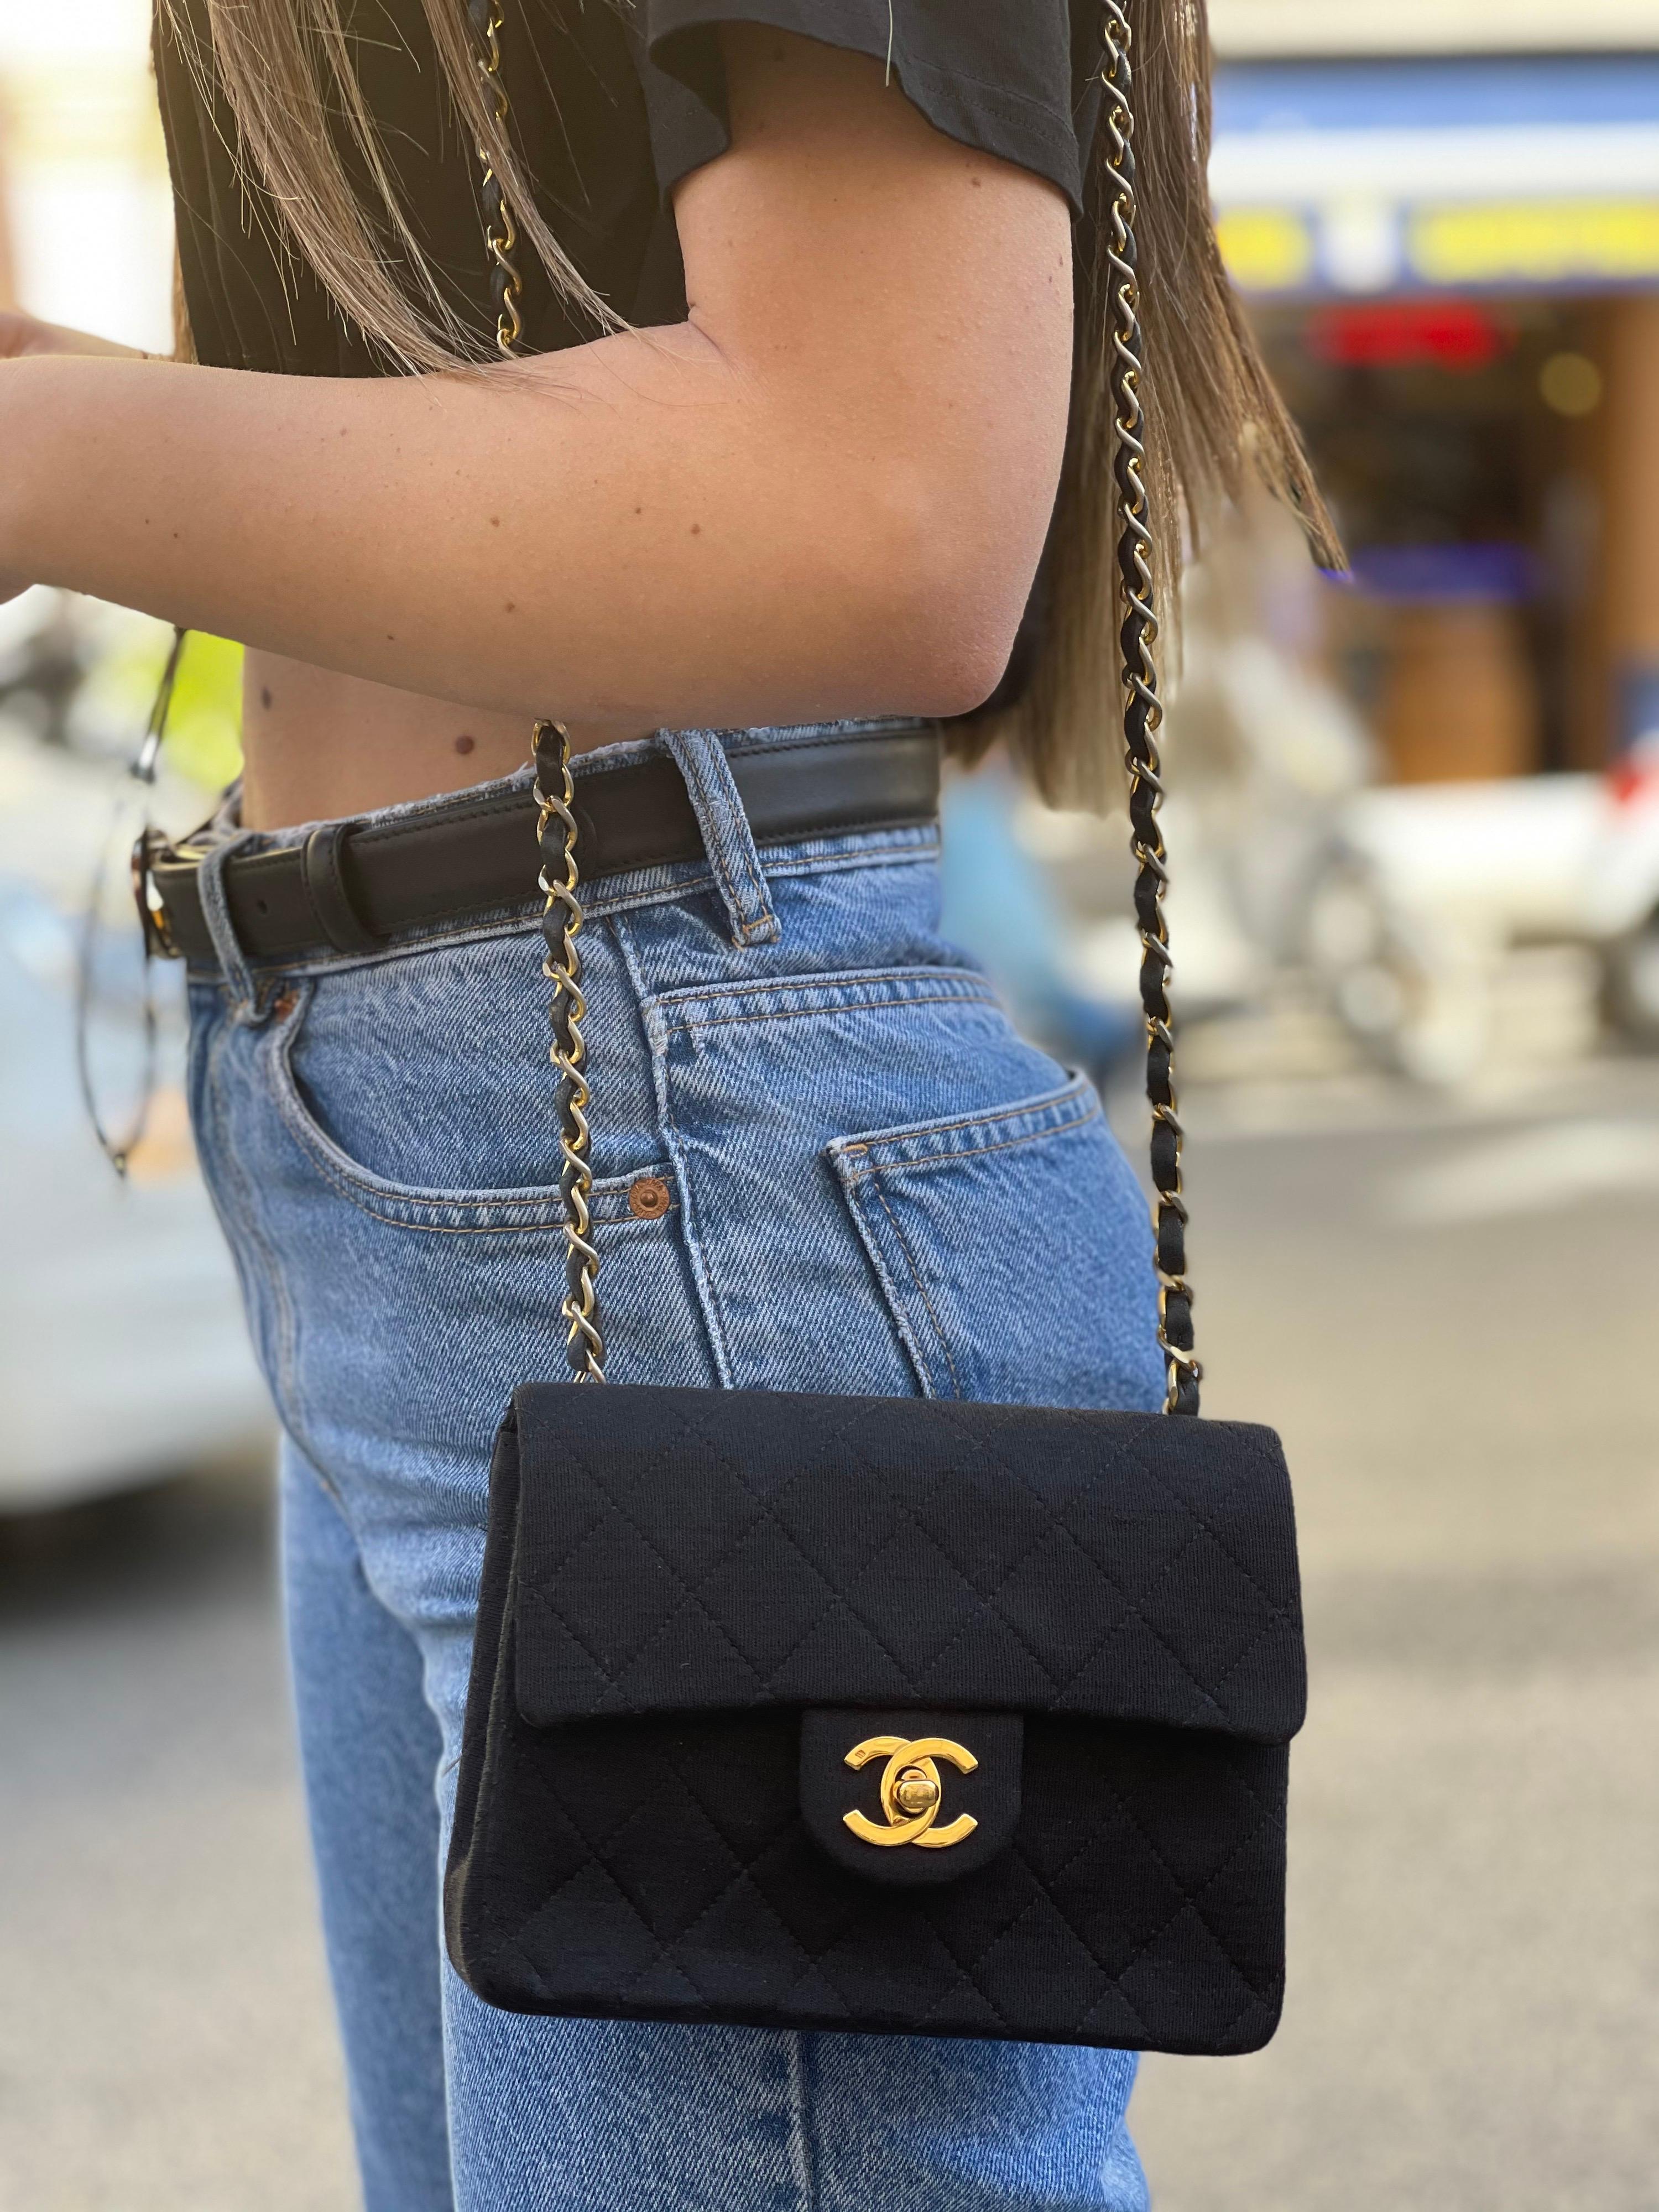 Chanel Mini Flap made of black fabric with golden hardware. Closure with CC hook, internally not very large. Equipped with a leather and chain shoulder strap. It seems in perfect conditions.